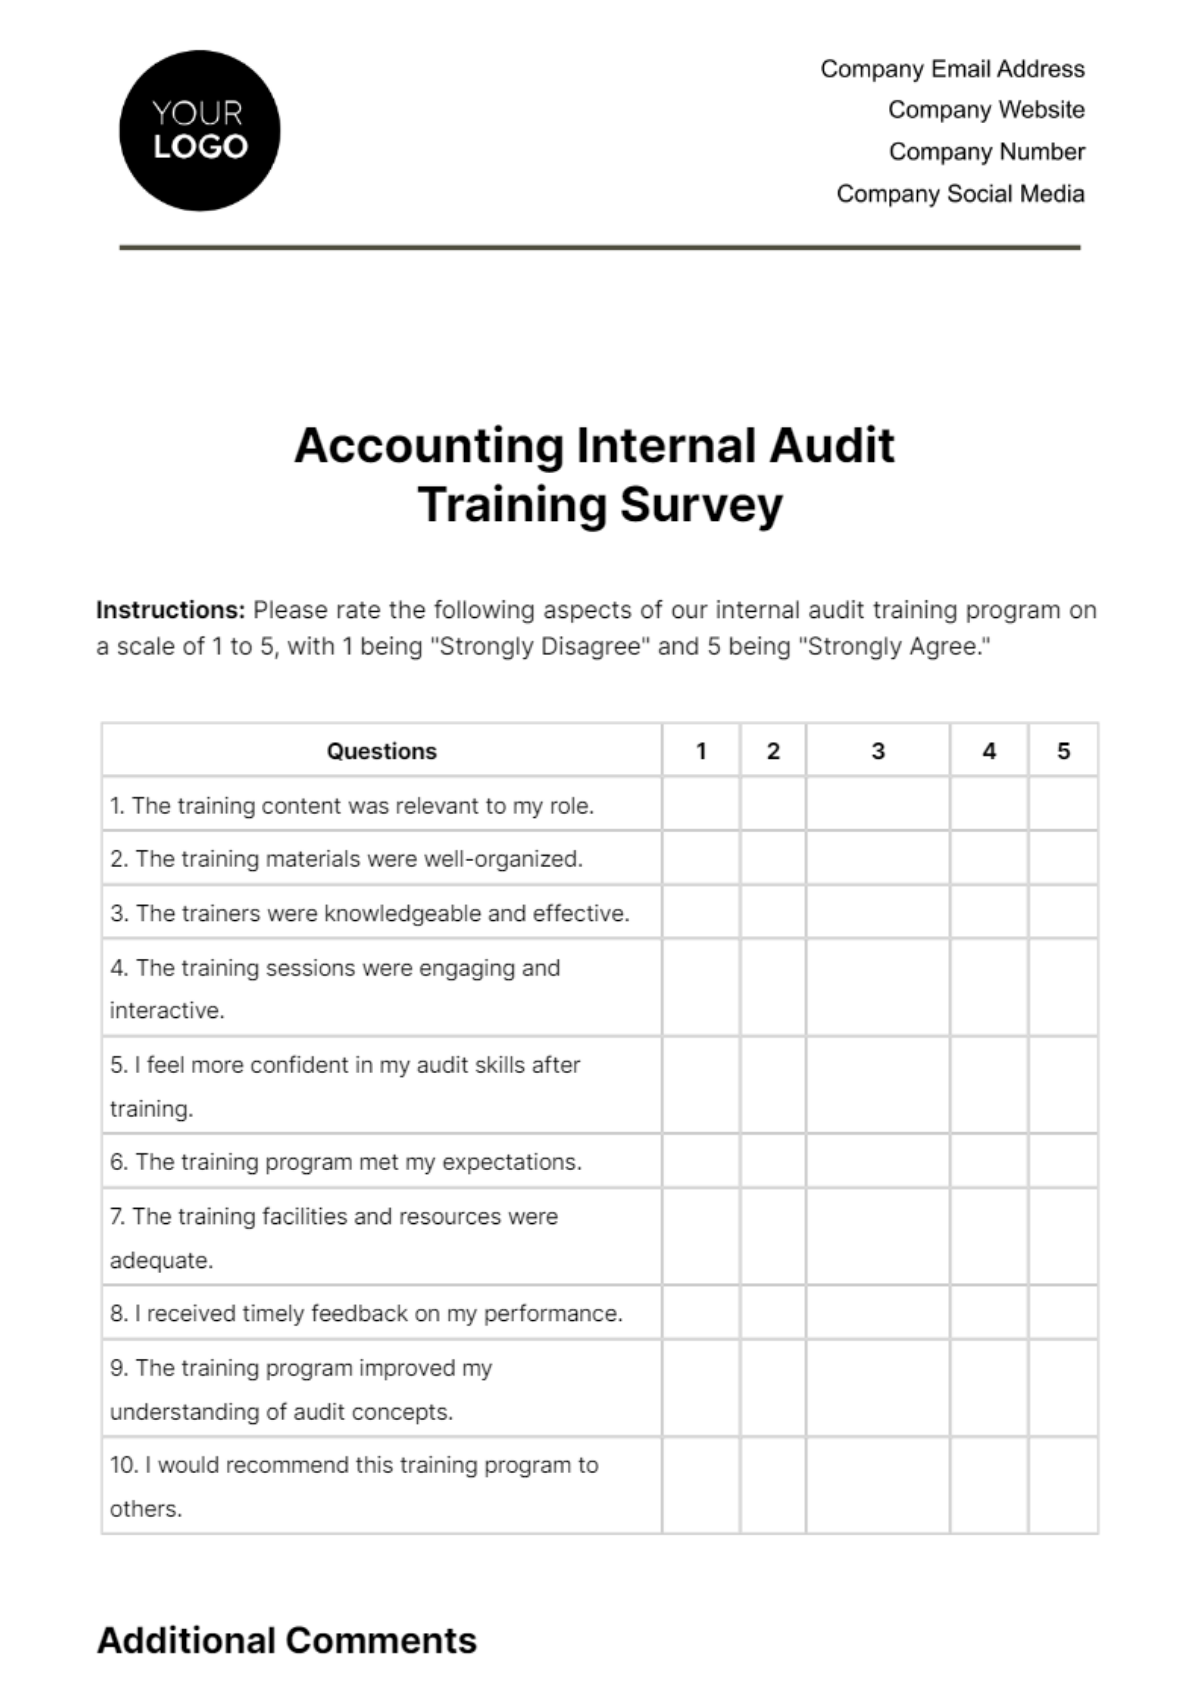 Free Accounting Internal Audit Training Survey Template